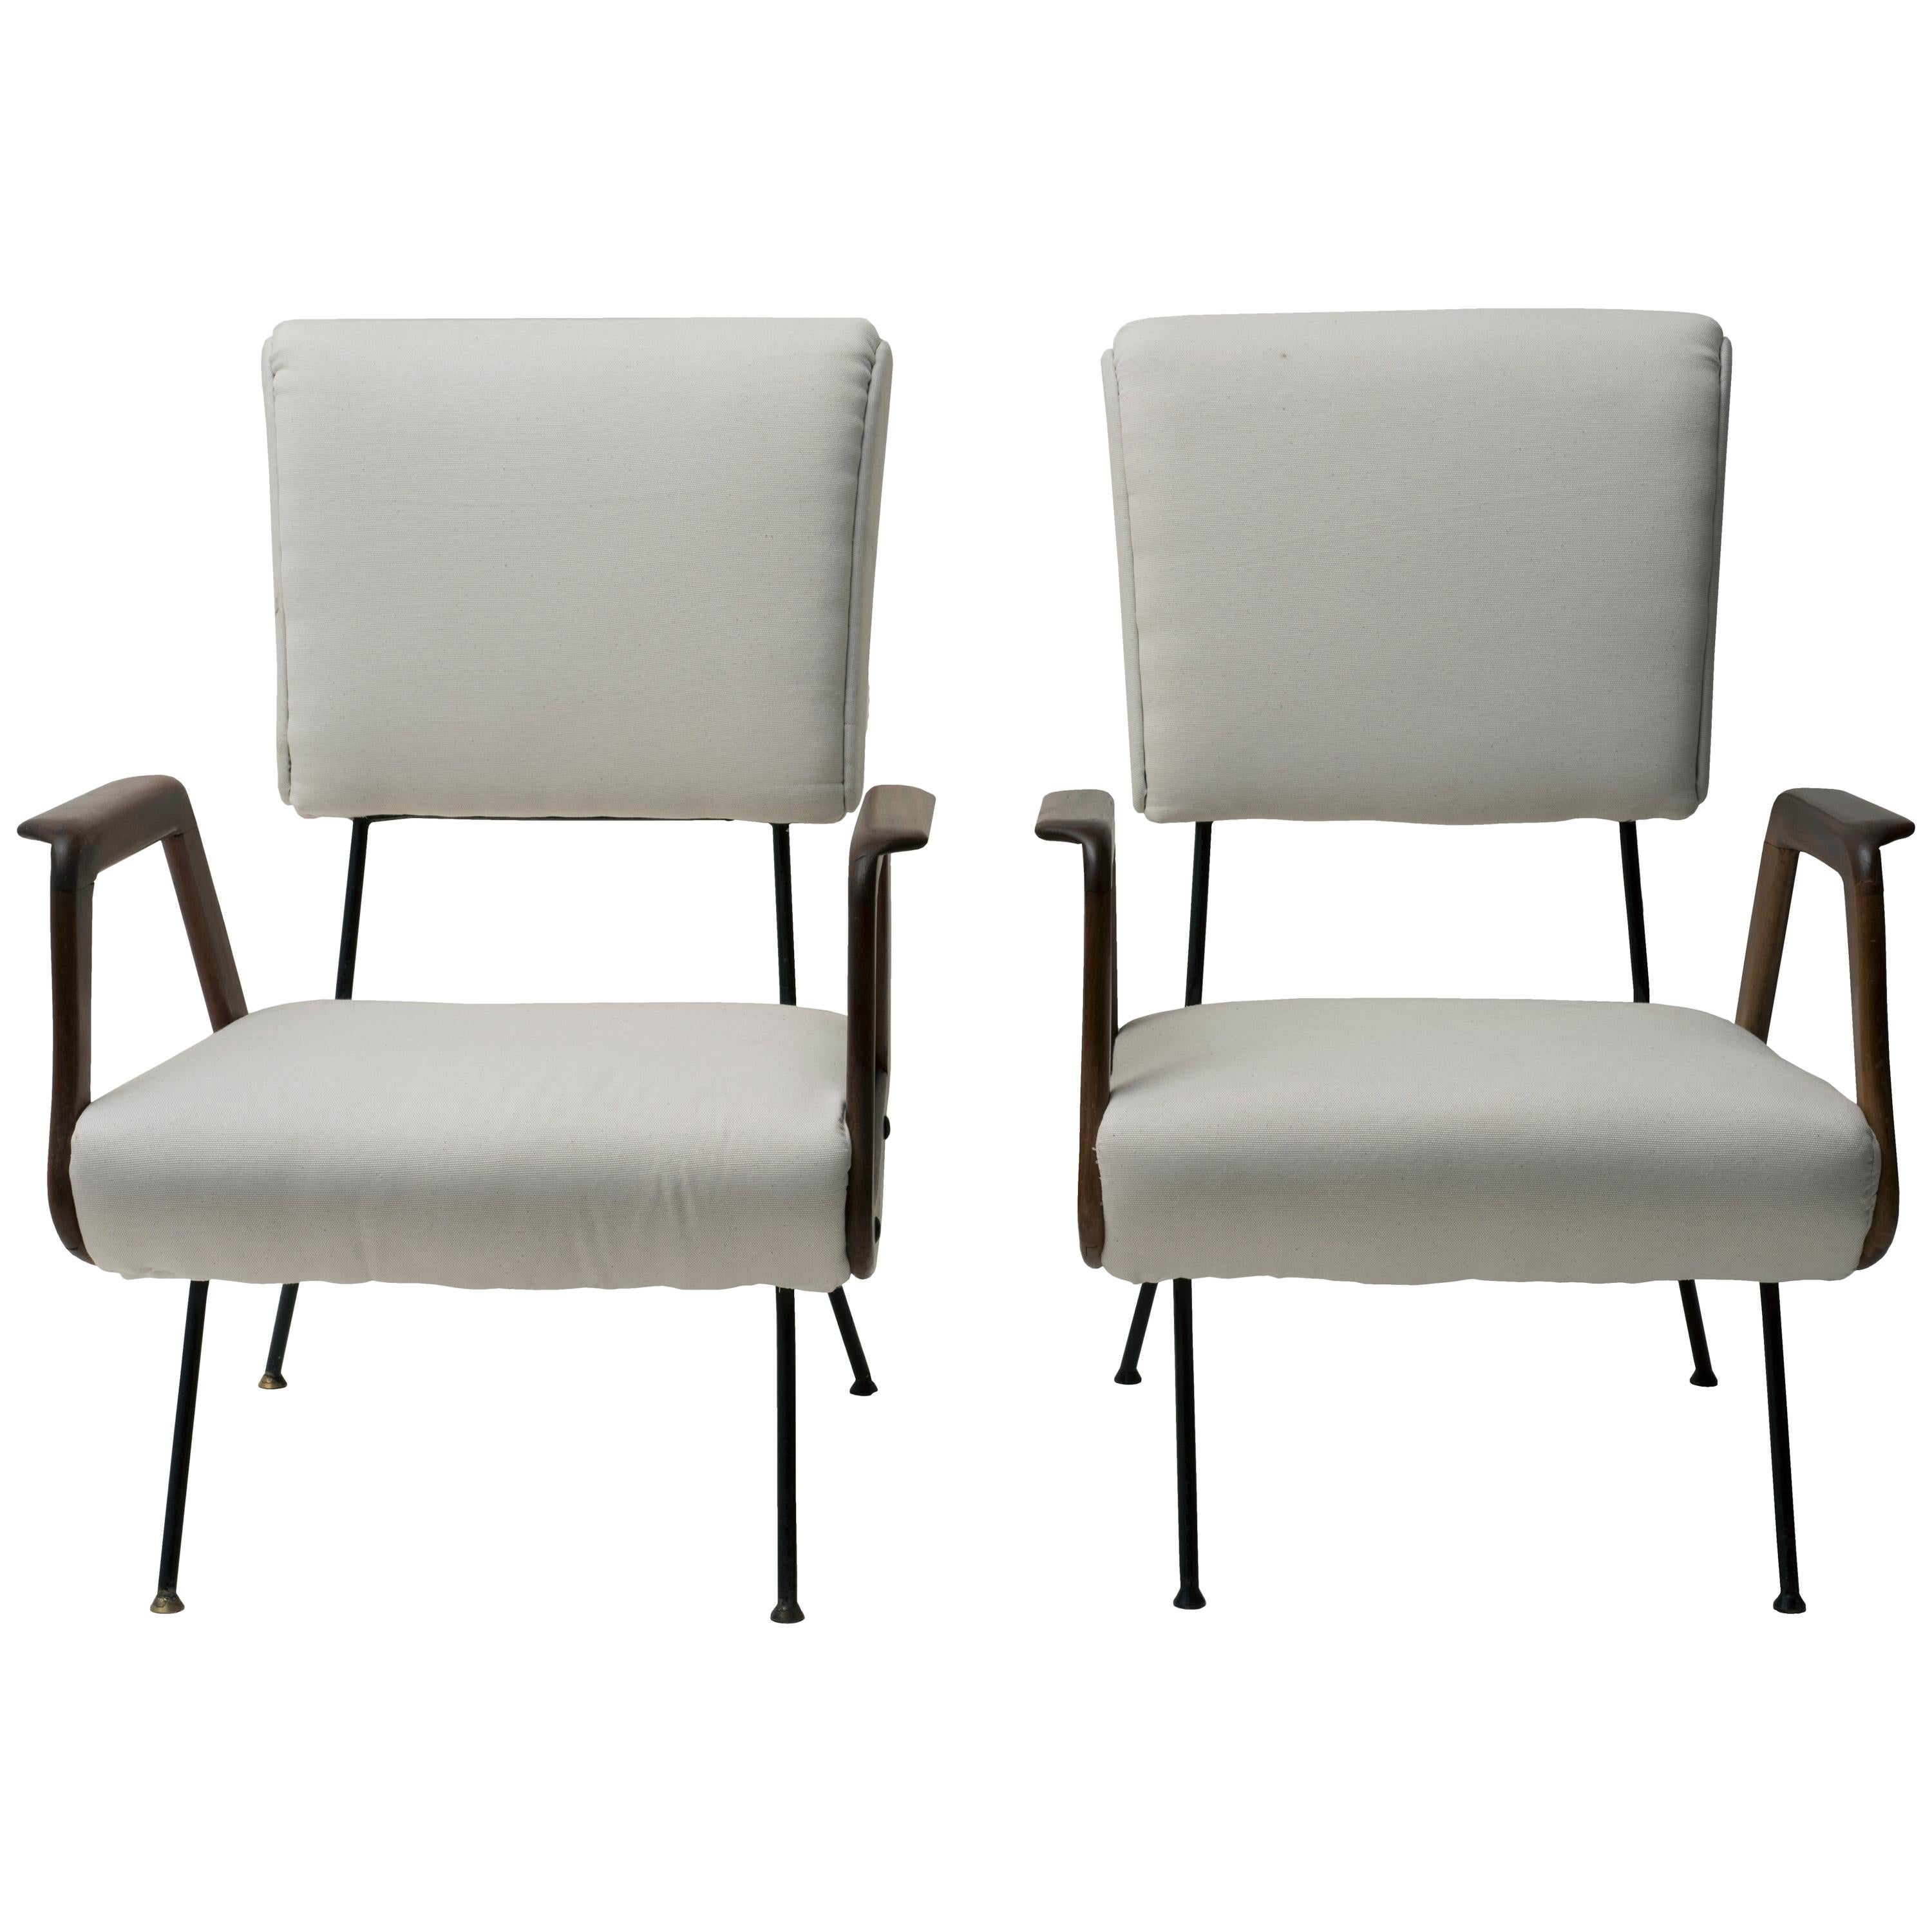 Pair of Vintage Armchairs Italian Production, 1950